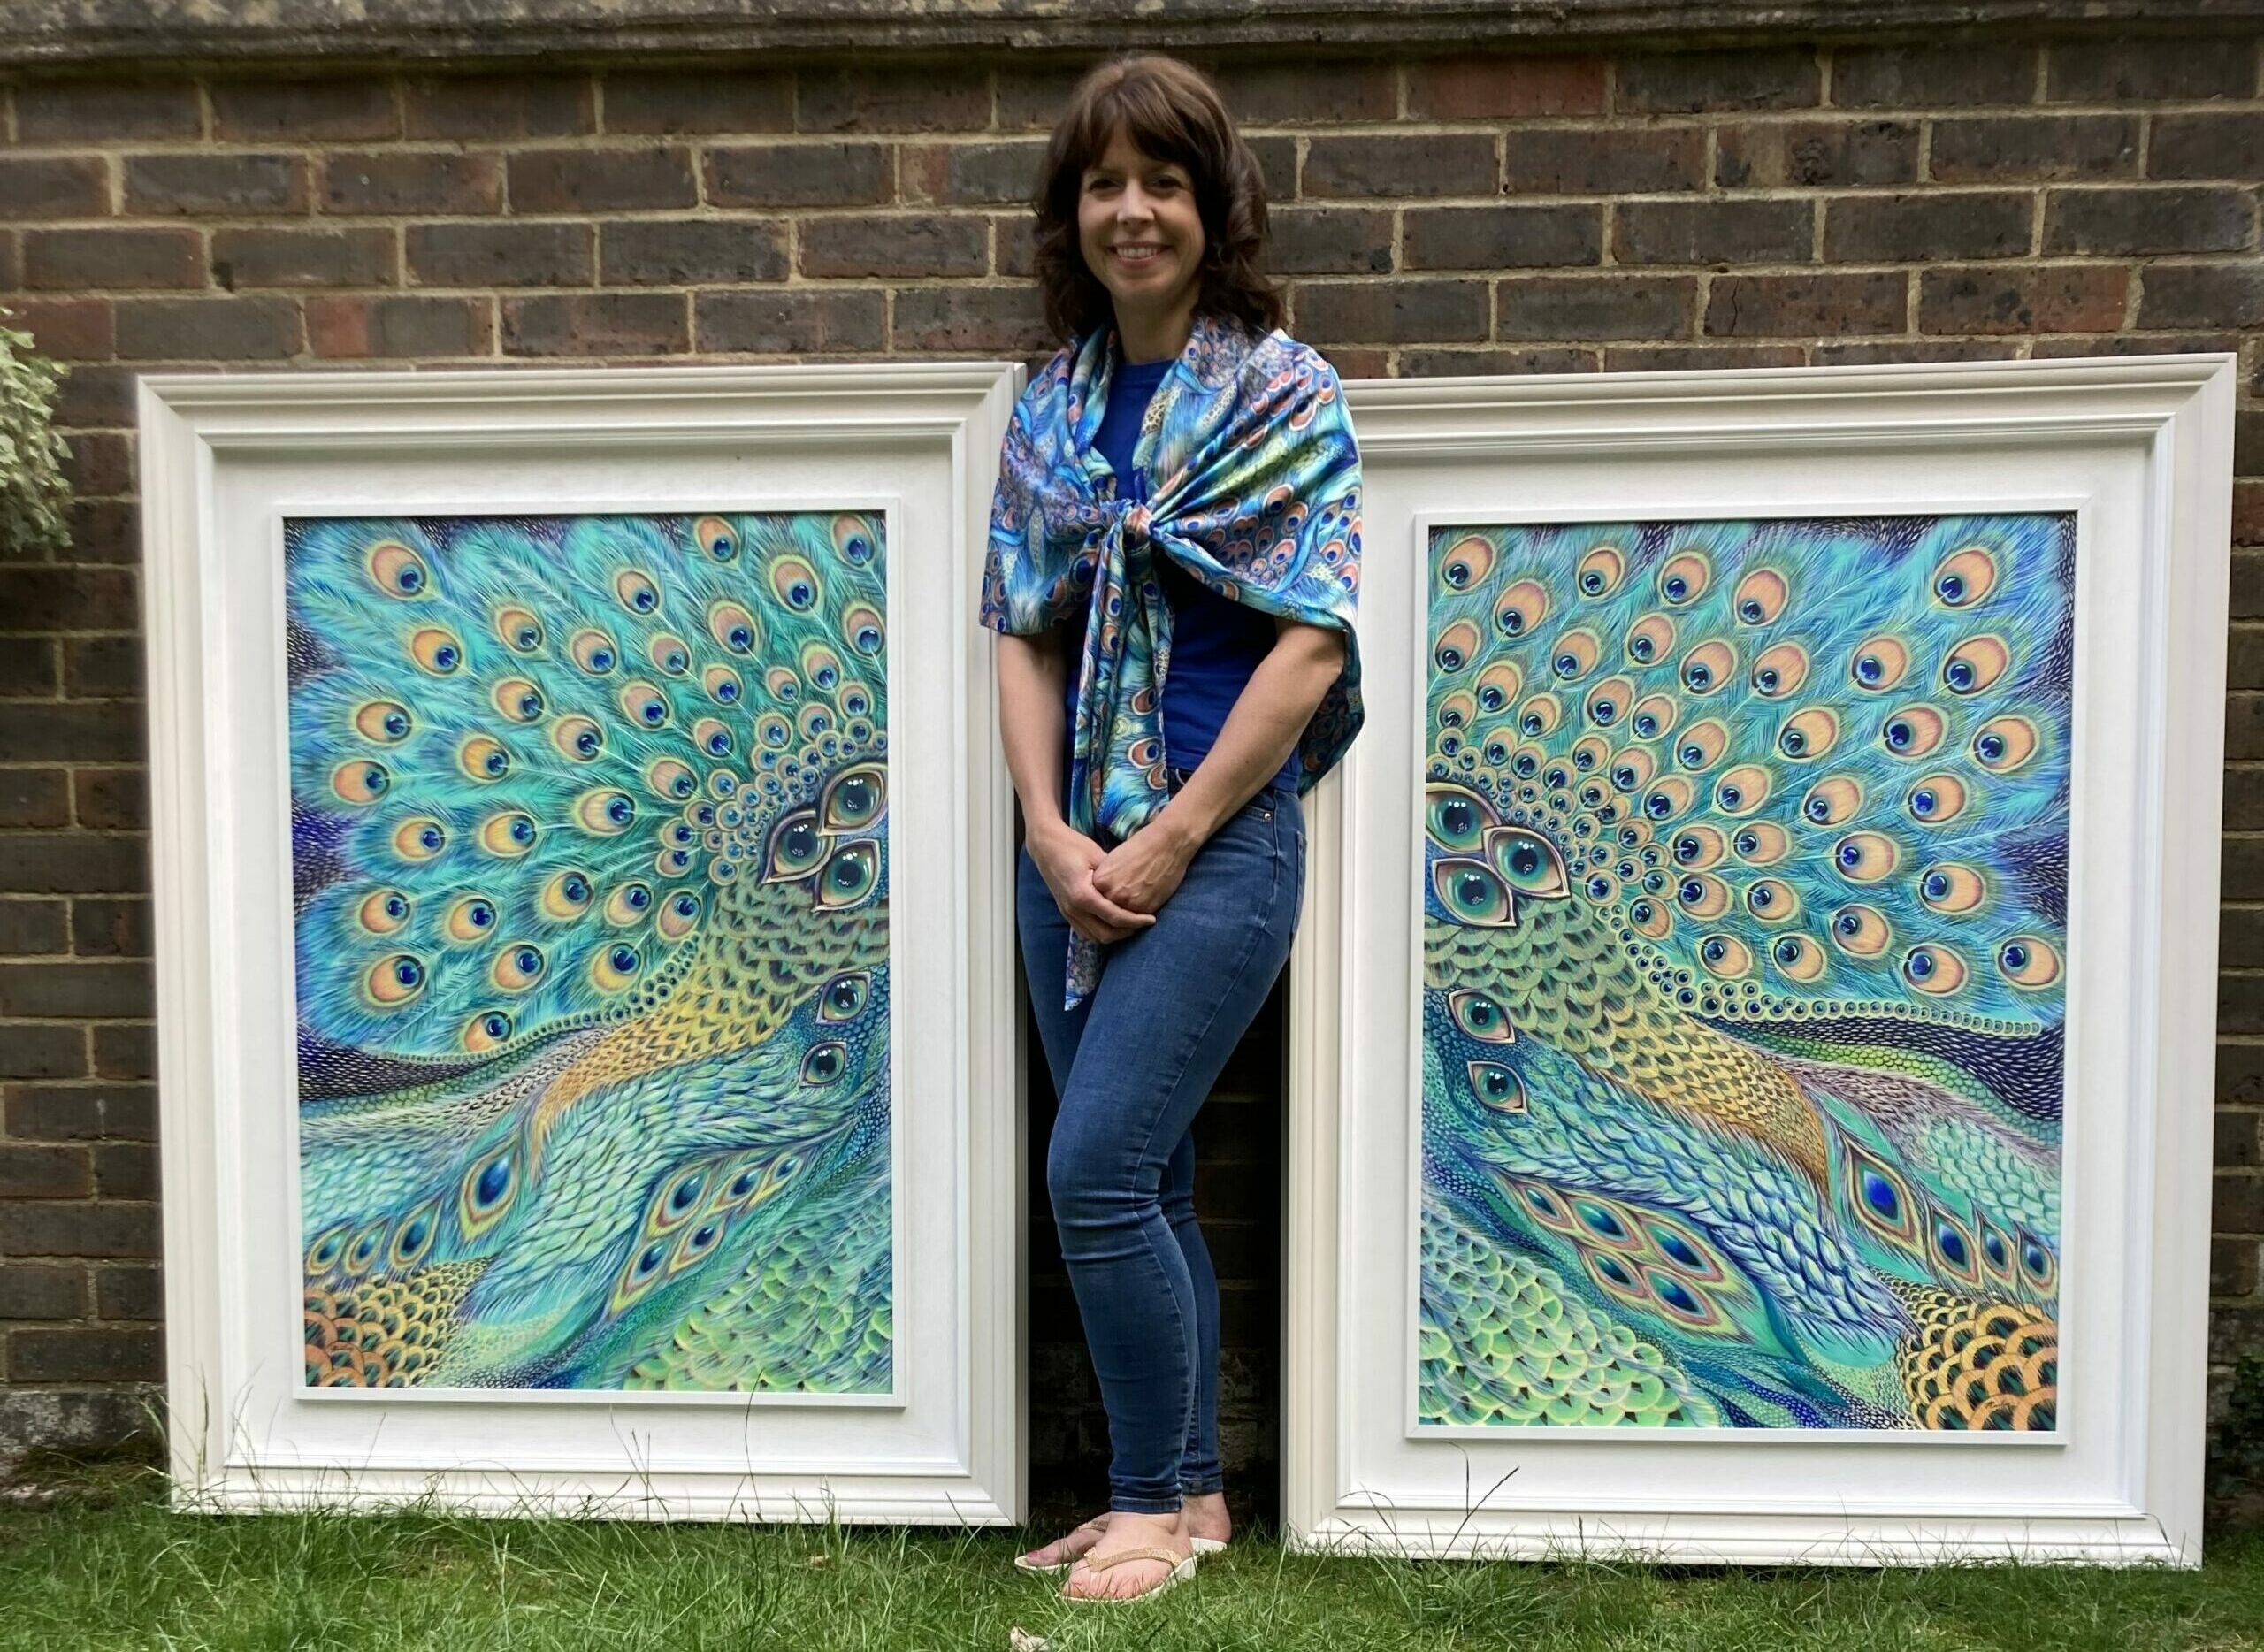 Me standing beside my 'Peacock Patterns' paintings - now on display in a house at St George's Hill.